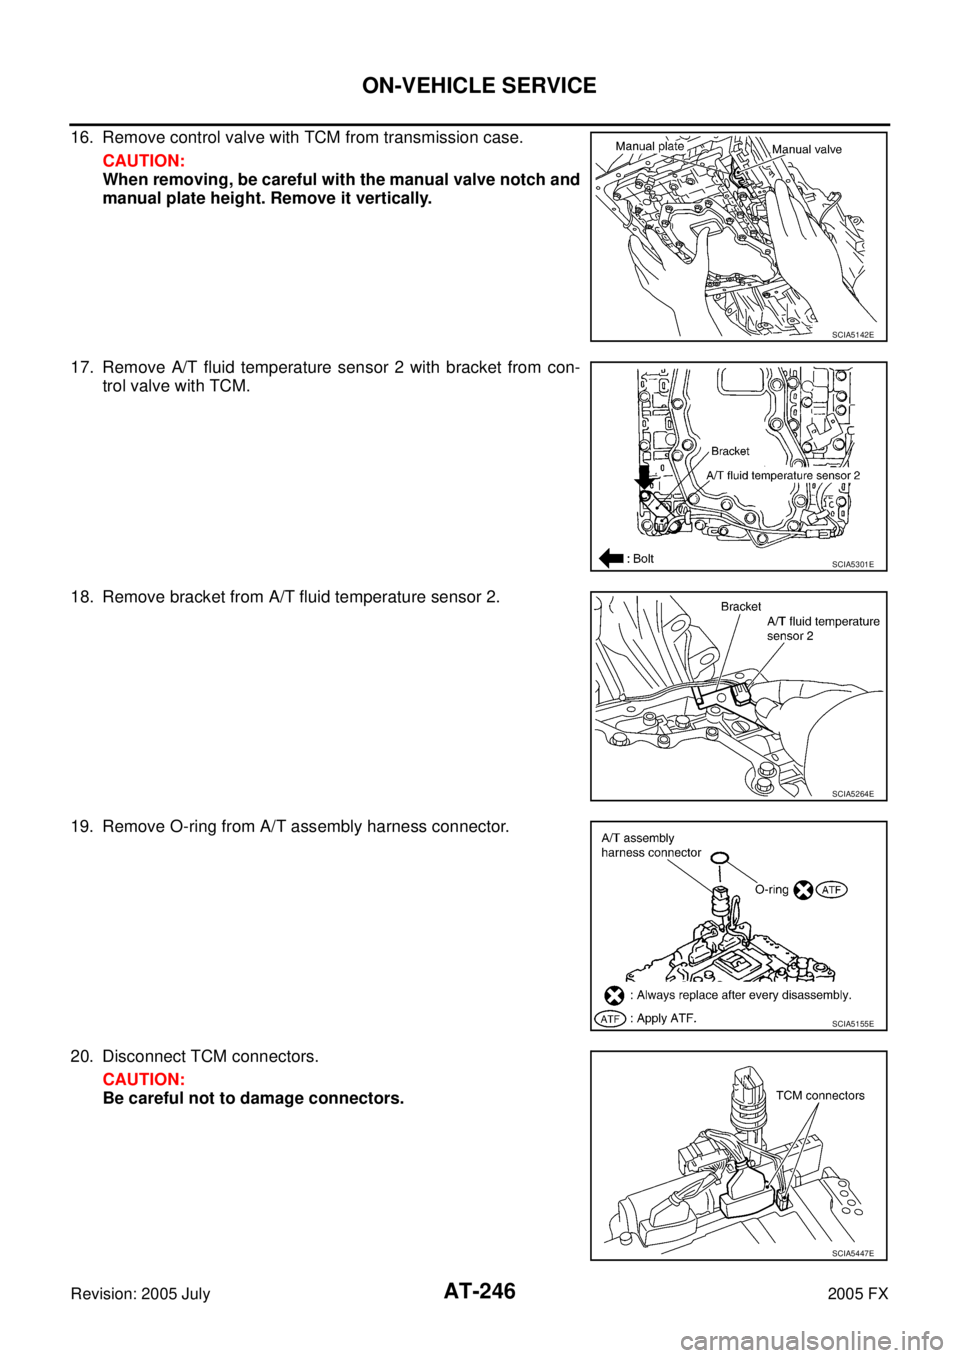 INFINITI FX35 2005  Service Manual AT-246
ON-VEHICLE SERVICE
Revision: 2005 July 2005 FX
16. Remove control valve with TCM from transmission case. 
CAUTION: 
When removing, be careful with the manual valve notch and
manual plate height